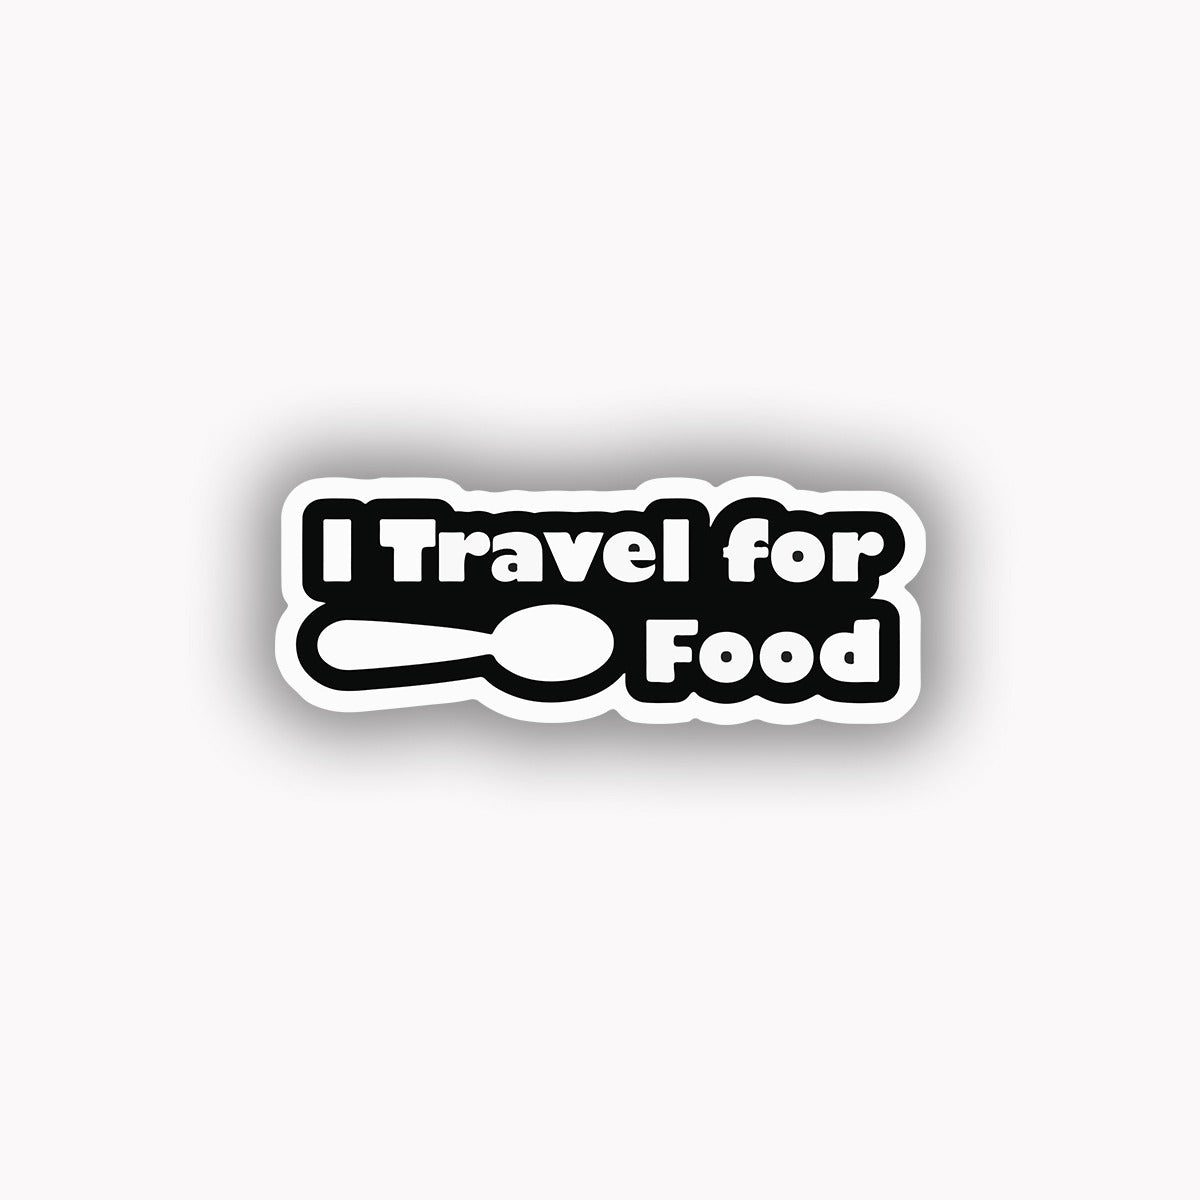 I travel for food